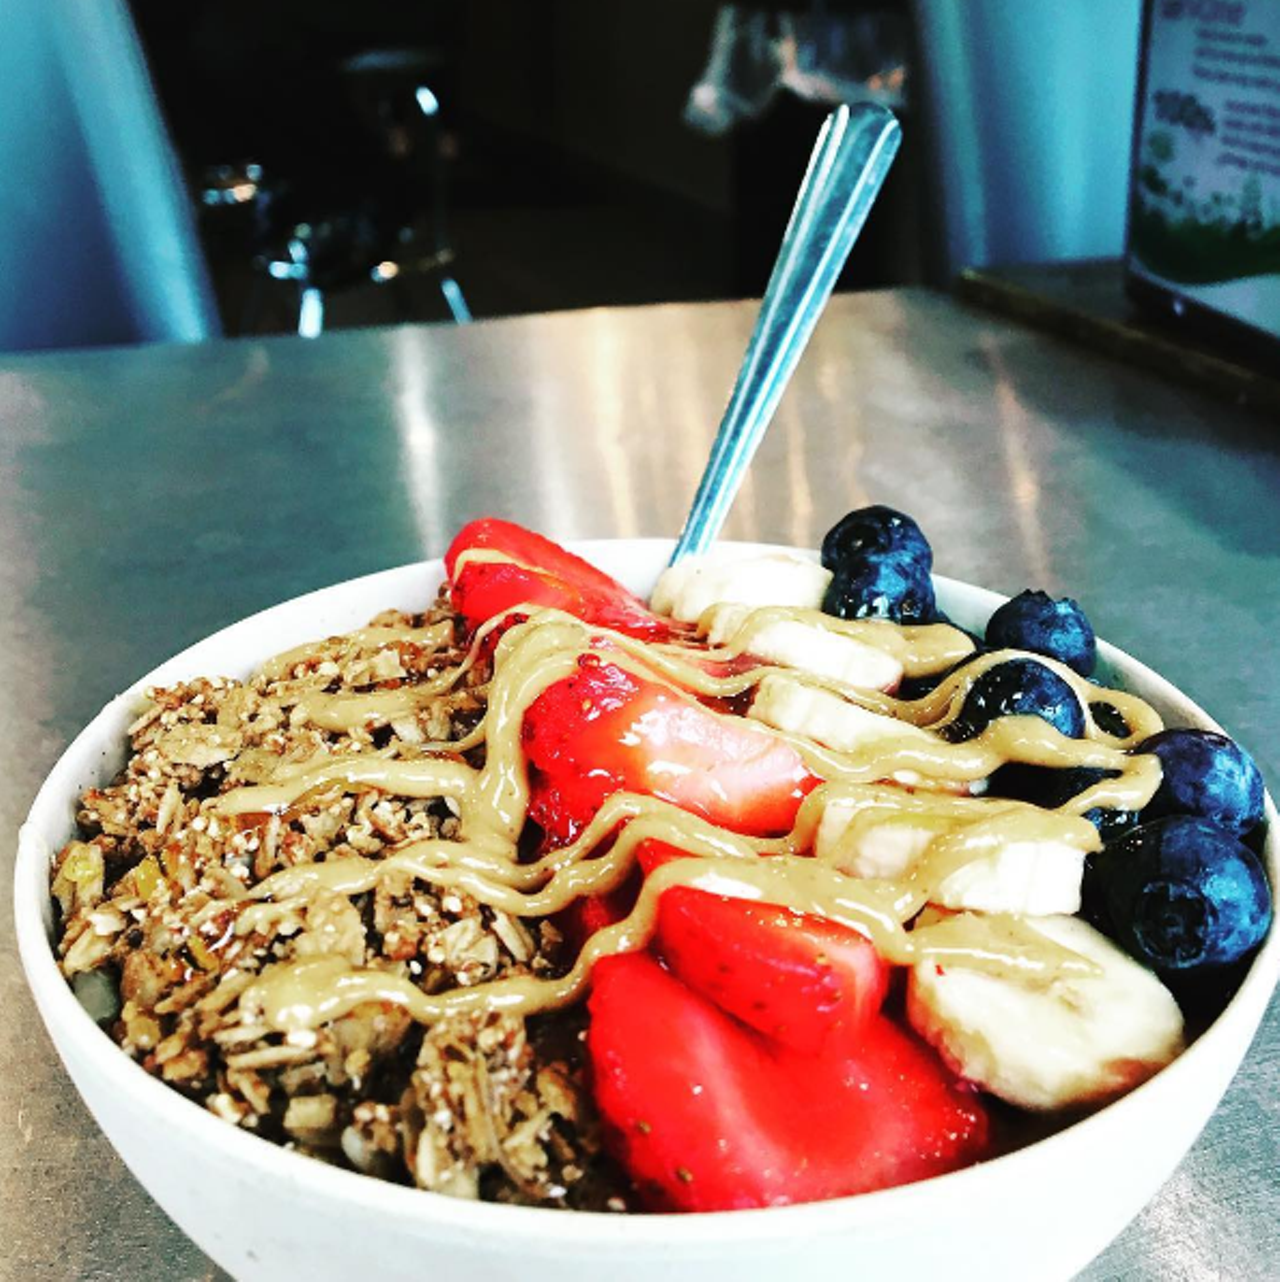 Hot: Smoothie bowls.
This is one of those viral trends that we really wouldn't mind seeing more of in Detroit. We've already got an abundance of greasy Coney Island fare available for breakfast. Wouldn't it be nice to see more healthy options dot the corners of the city?
Photos via @cafesucco